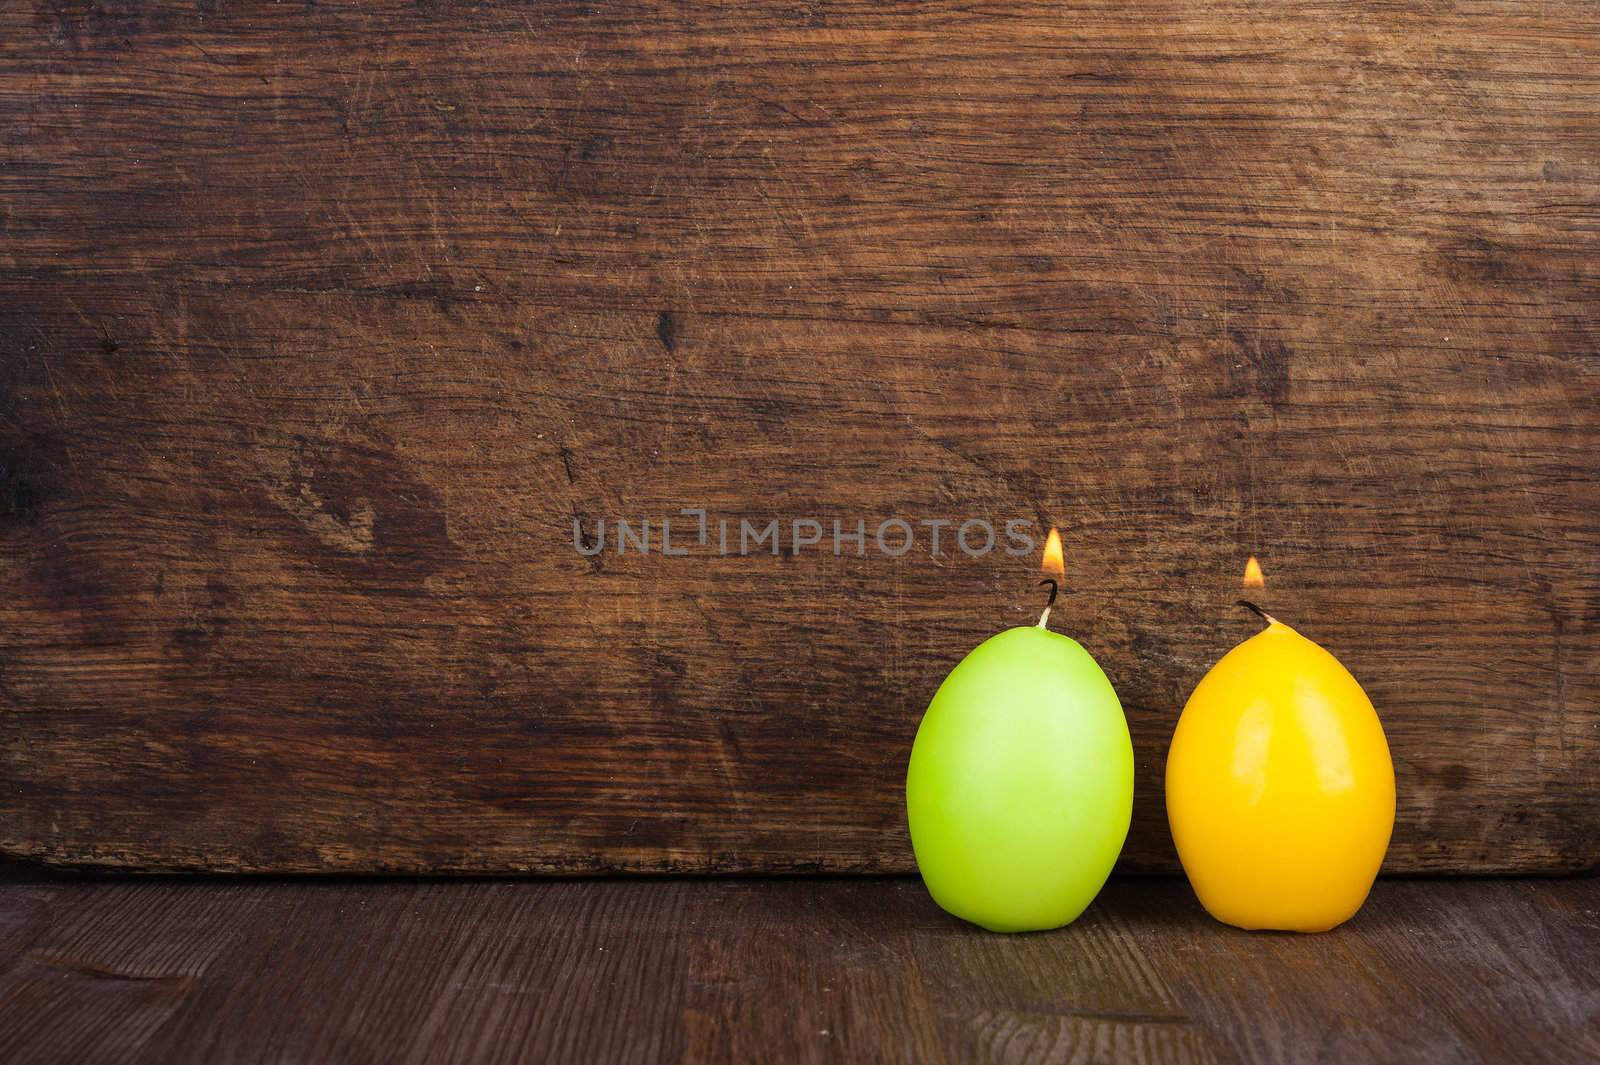 Candles in the form of eggs on the background of a wooden surface